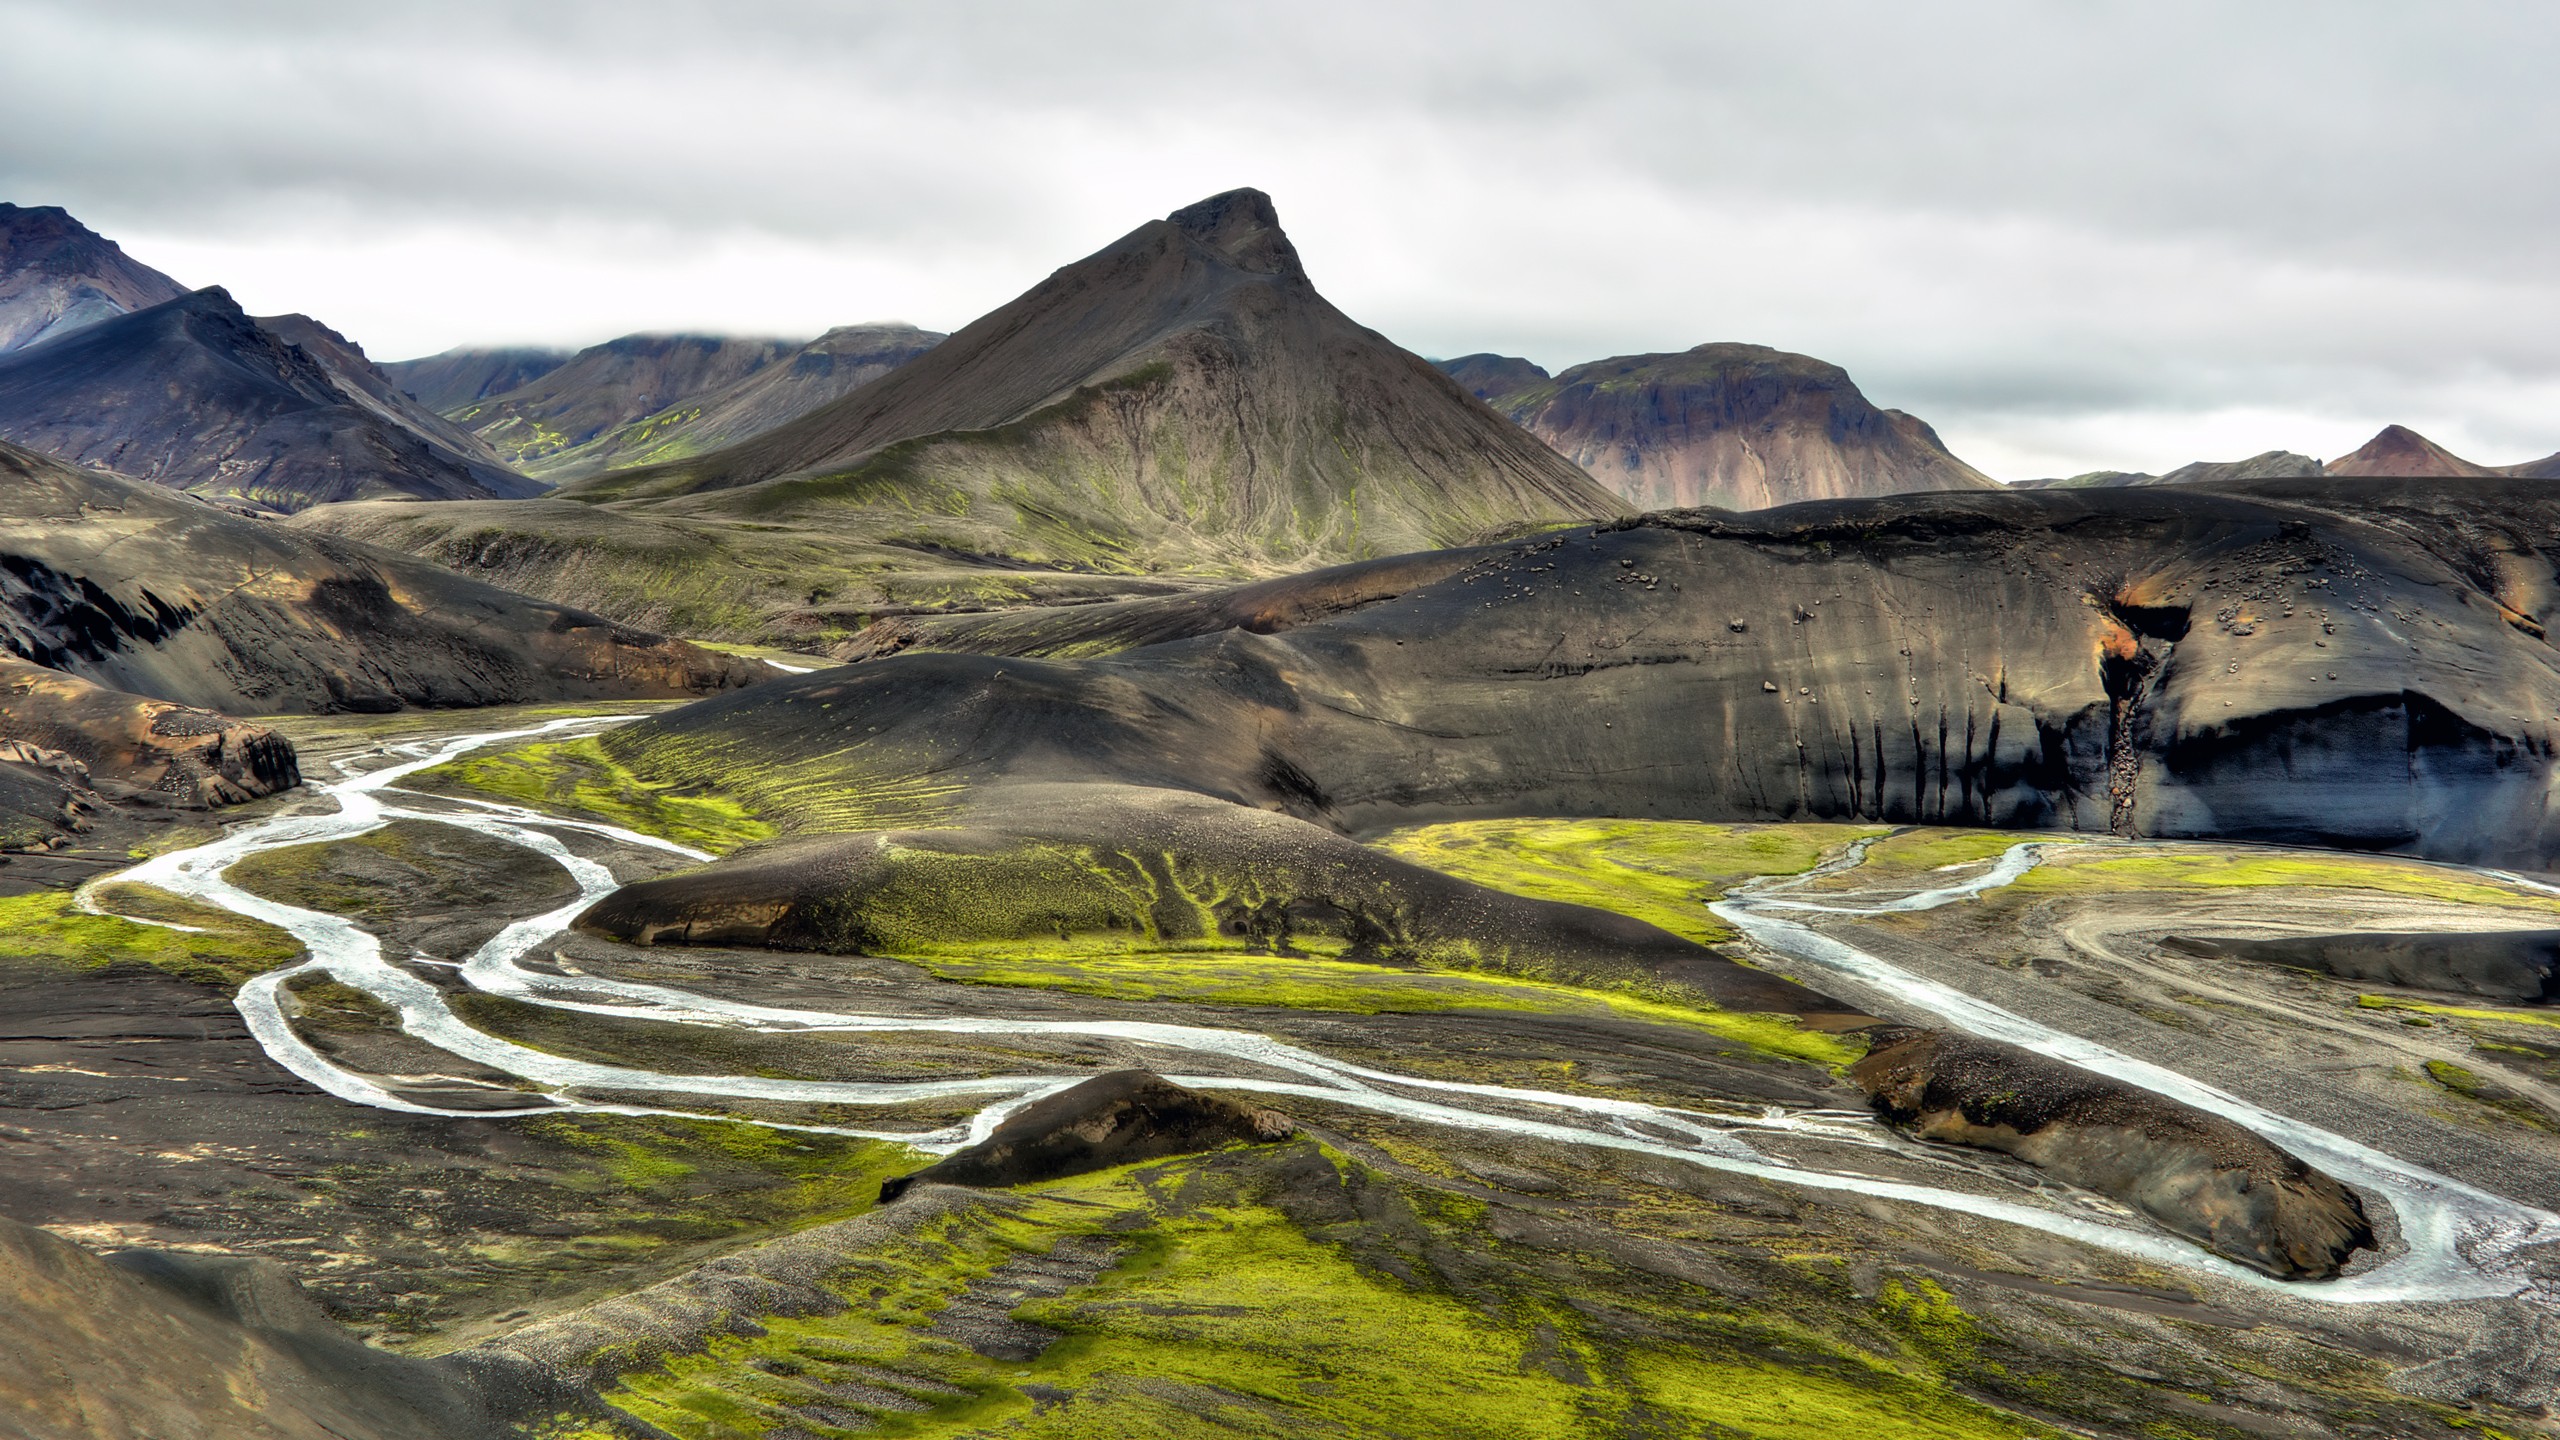 General 2560x1440 nature landscape mountains Iceland river stream clouds moss rocks